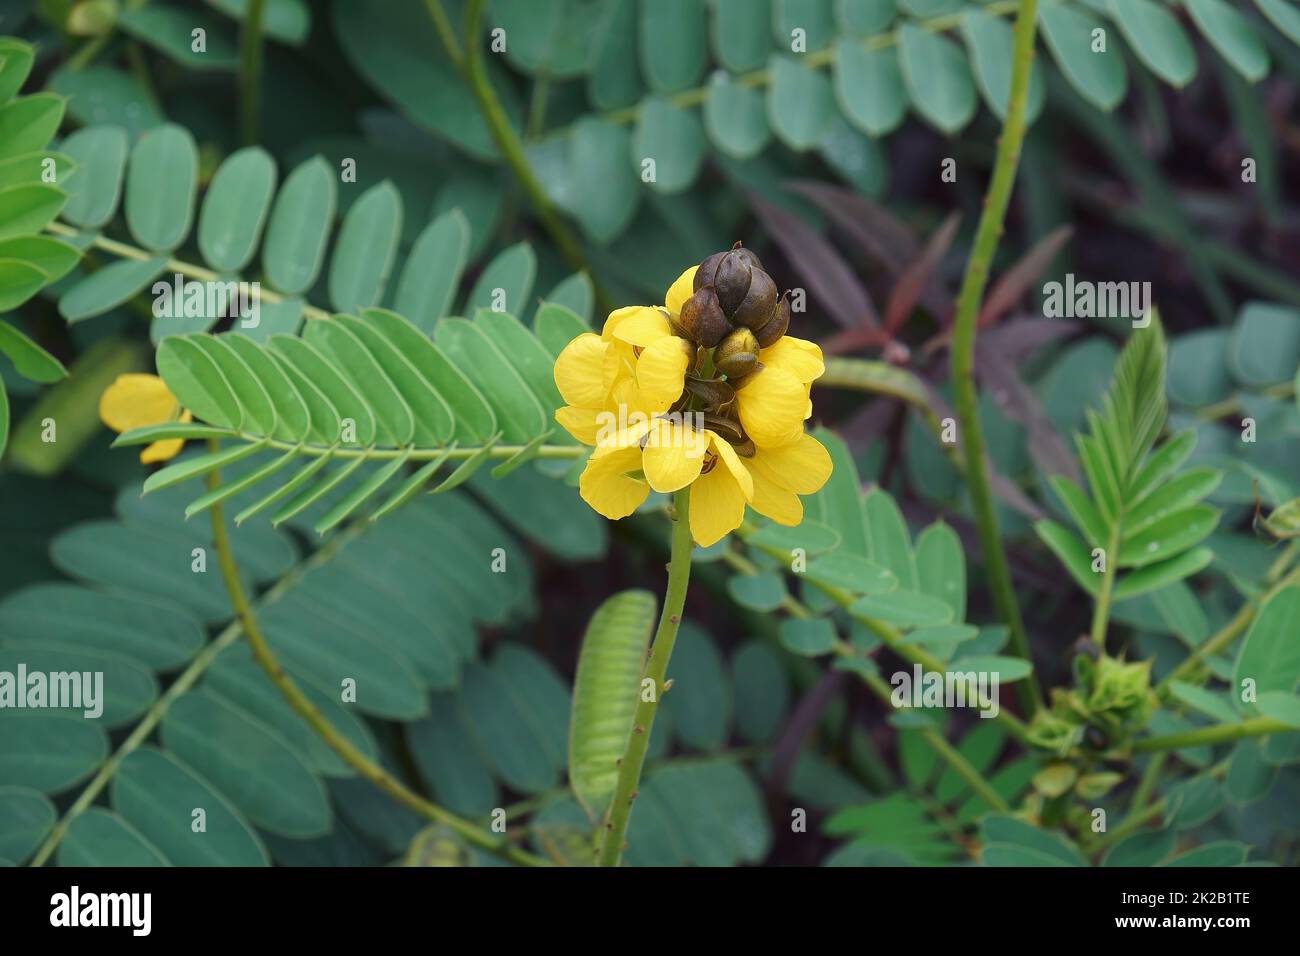 Image of African senna plant in blossom Stock Photo